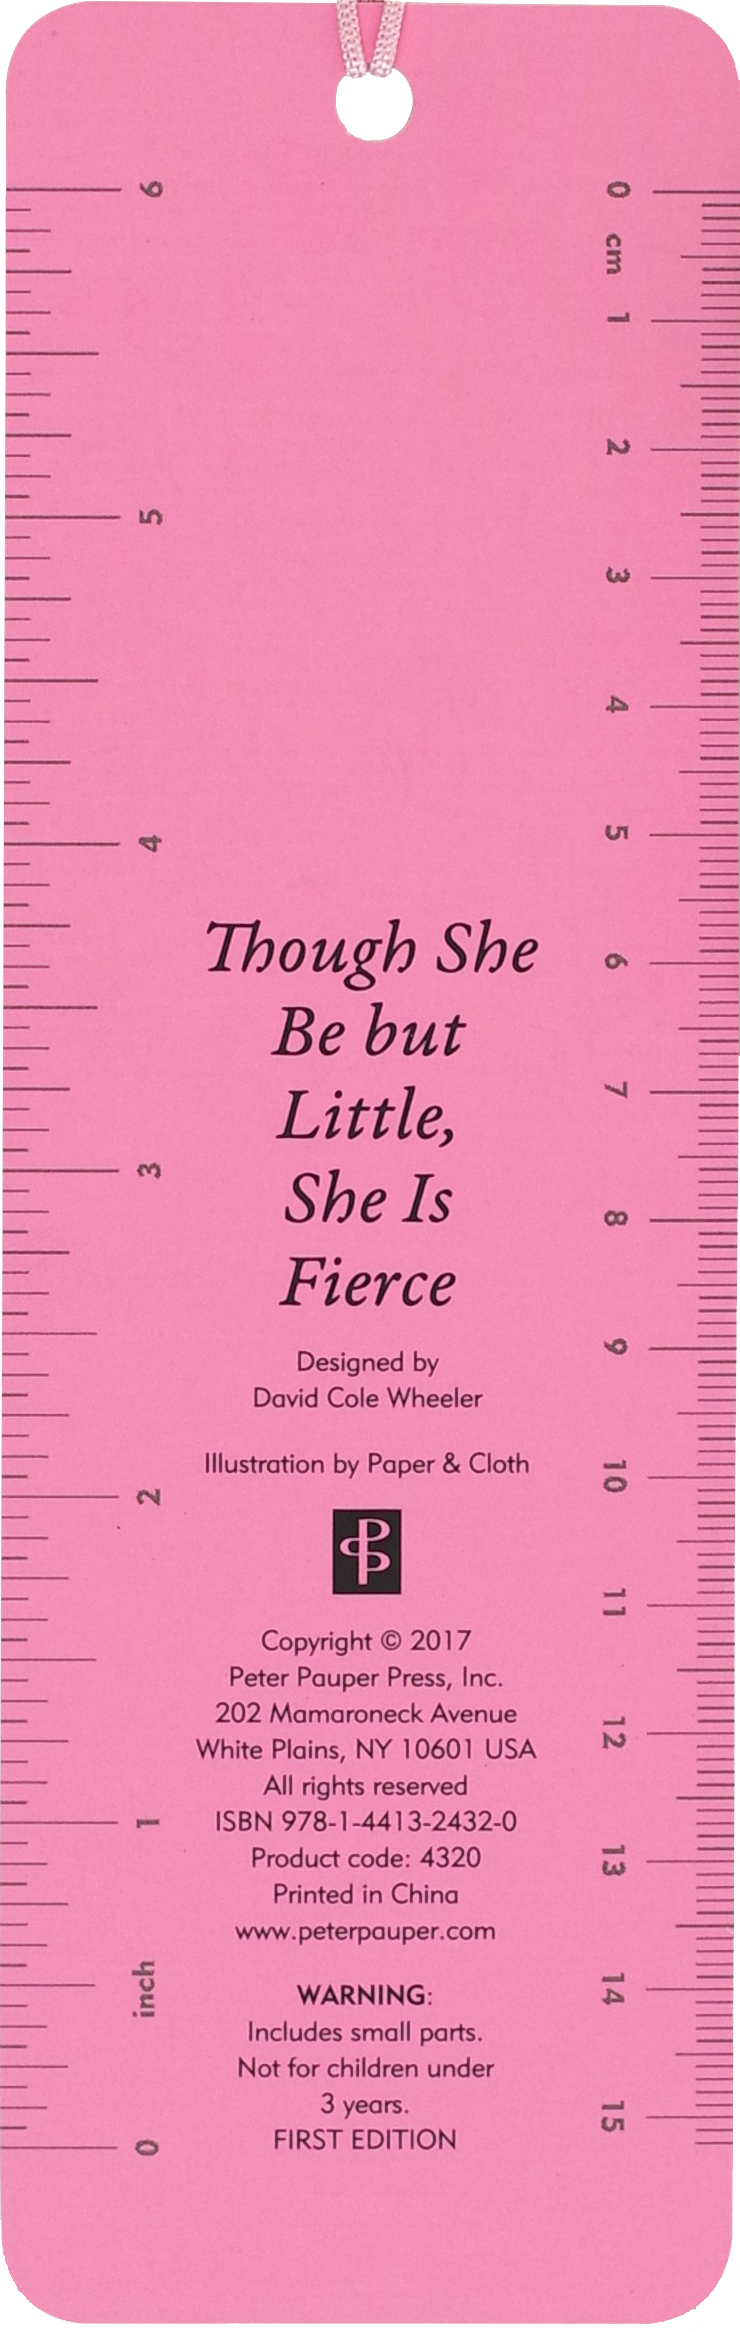 Though She Be but Little, She is Fierce Beaded Bookmark